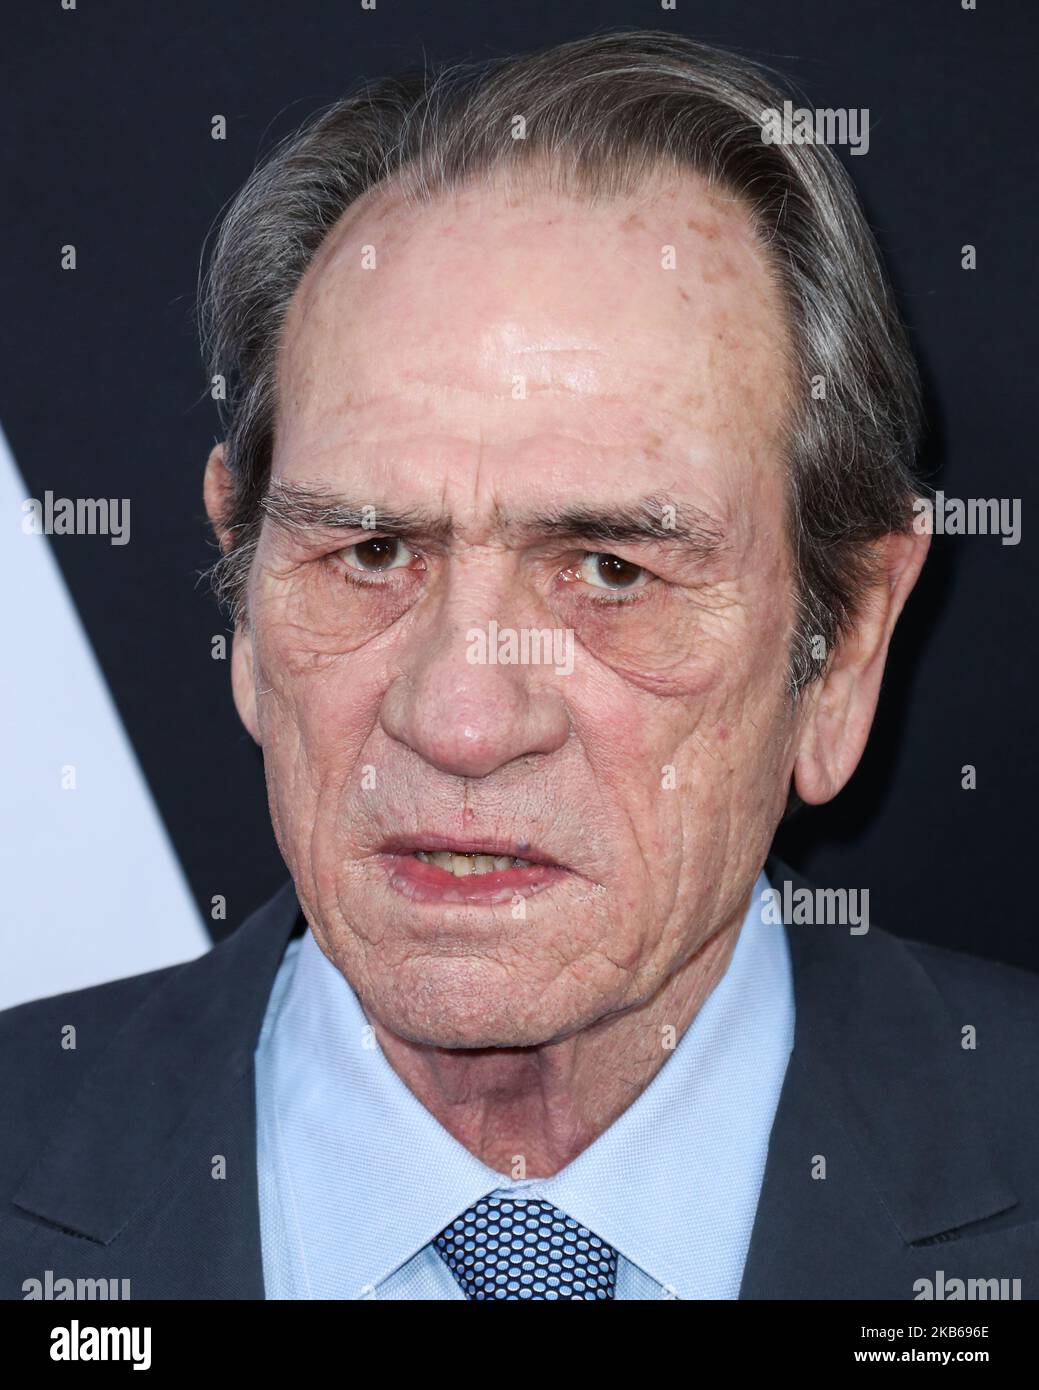 HOLLYWOOD, LOS ANGELES, CALIFORNIA, USA - SEPTEMBER 18: Actor Tommy Lee Jones arrives at the Los Angeles Premiere Of 20th Century Fox's 'Ad Astra' held at ArcLight Cinemas Hollywood Cinerama Dome on August 18, 2019 in Hollywood, Los Angeles, California, United States. (Photo by Xavier Collin/Image Press Agency/NurPhoto) Stock Photo